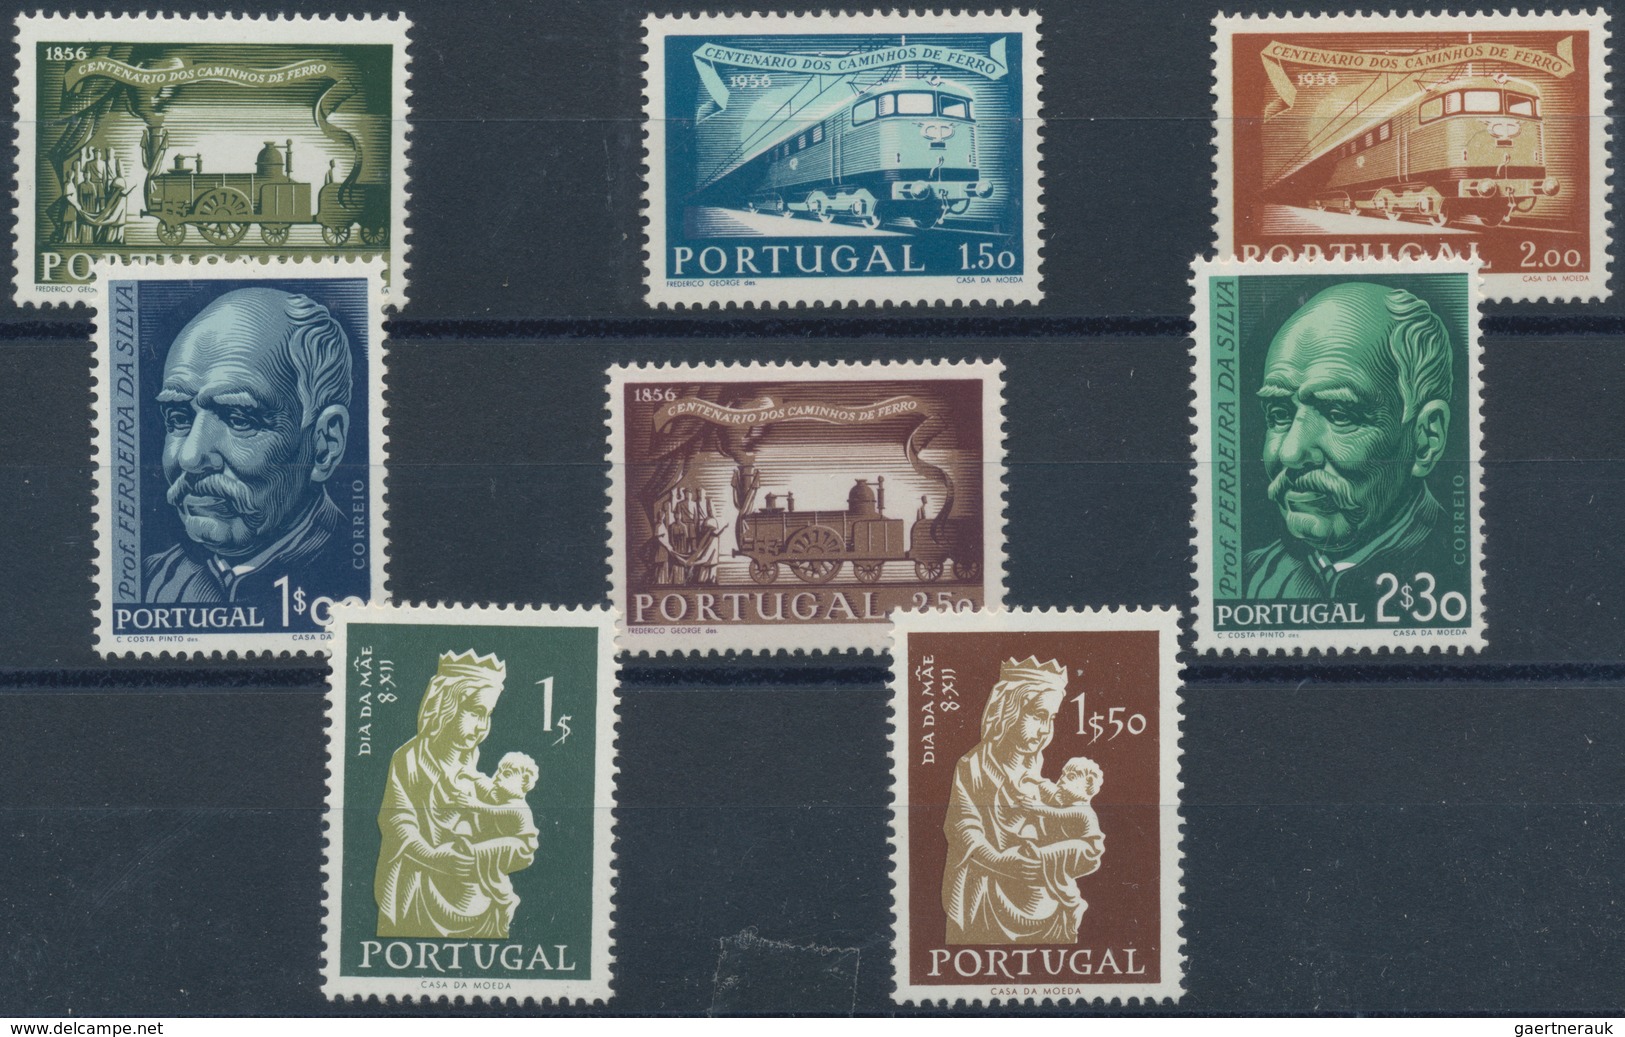 Portugal: 1940/1984, stock of stamps and complete year sets, mint never hinged, quite a few stamps m